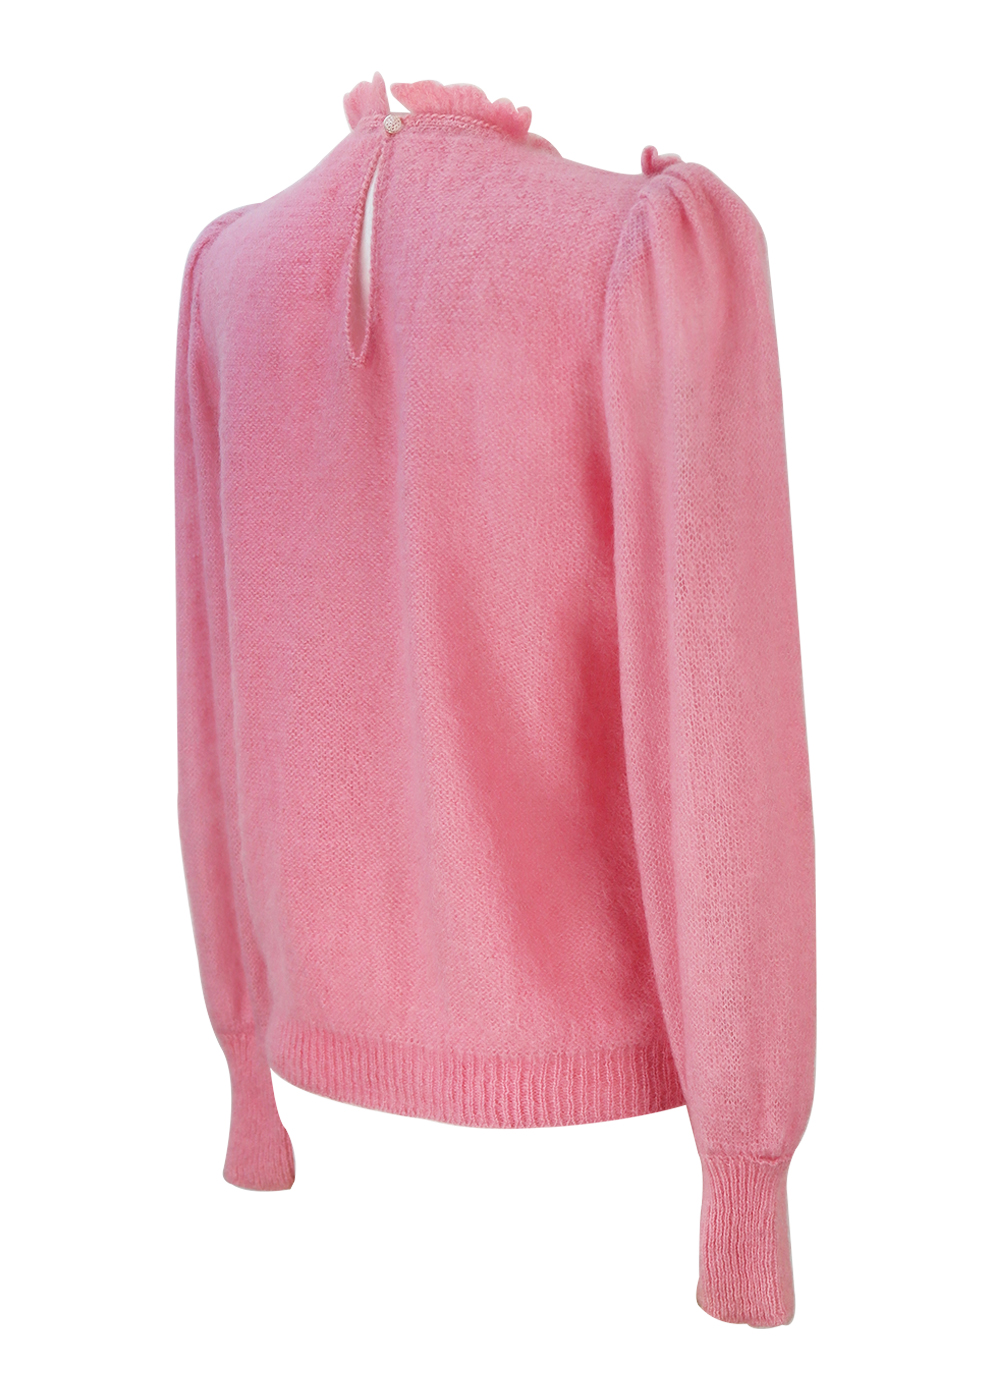 Soft Pink Jumper with Blue, Green, White & Pink Floral Embroidery ...